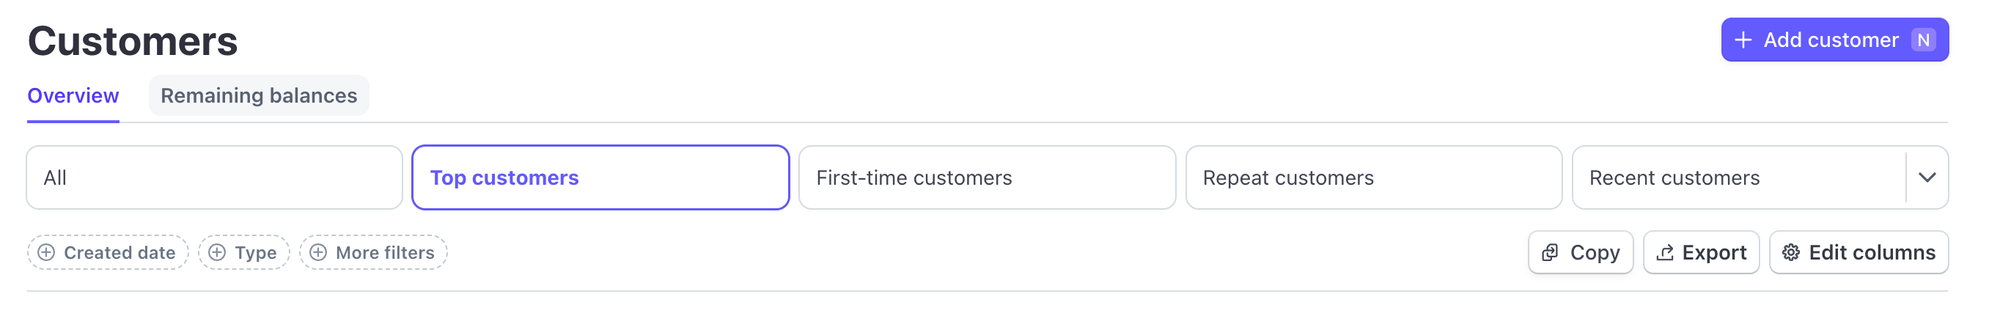 Screenshot of the Customer List Page in the Stripe Dashboard which has filters like Top Customers or First-time customers